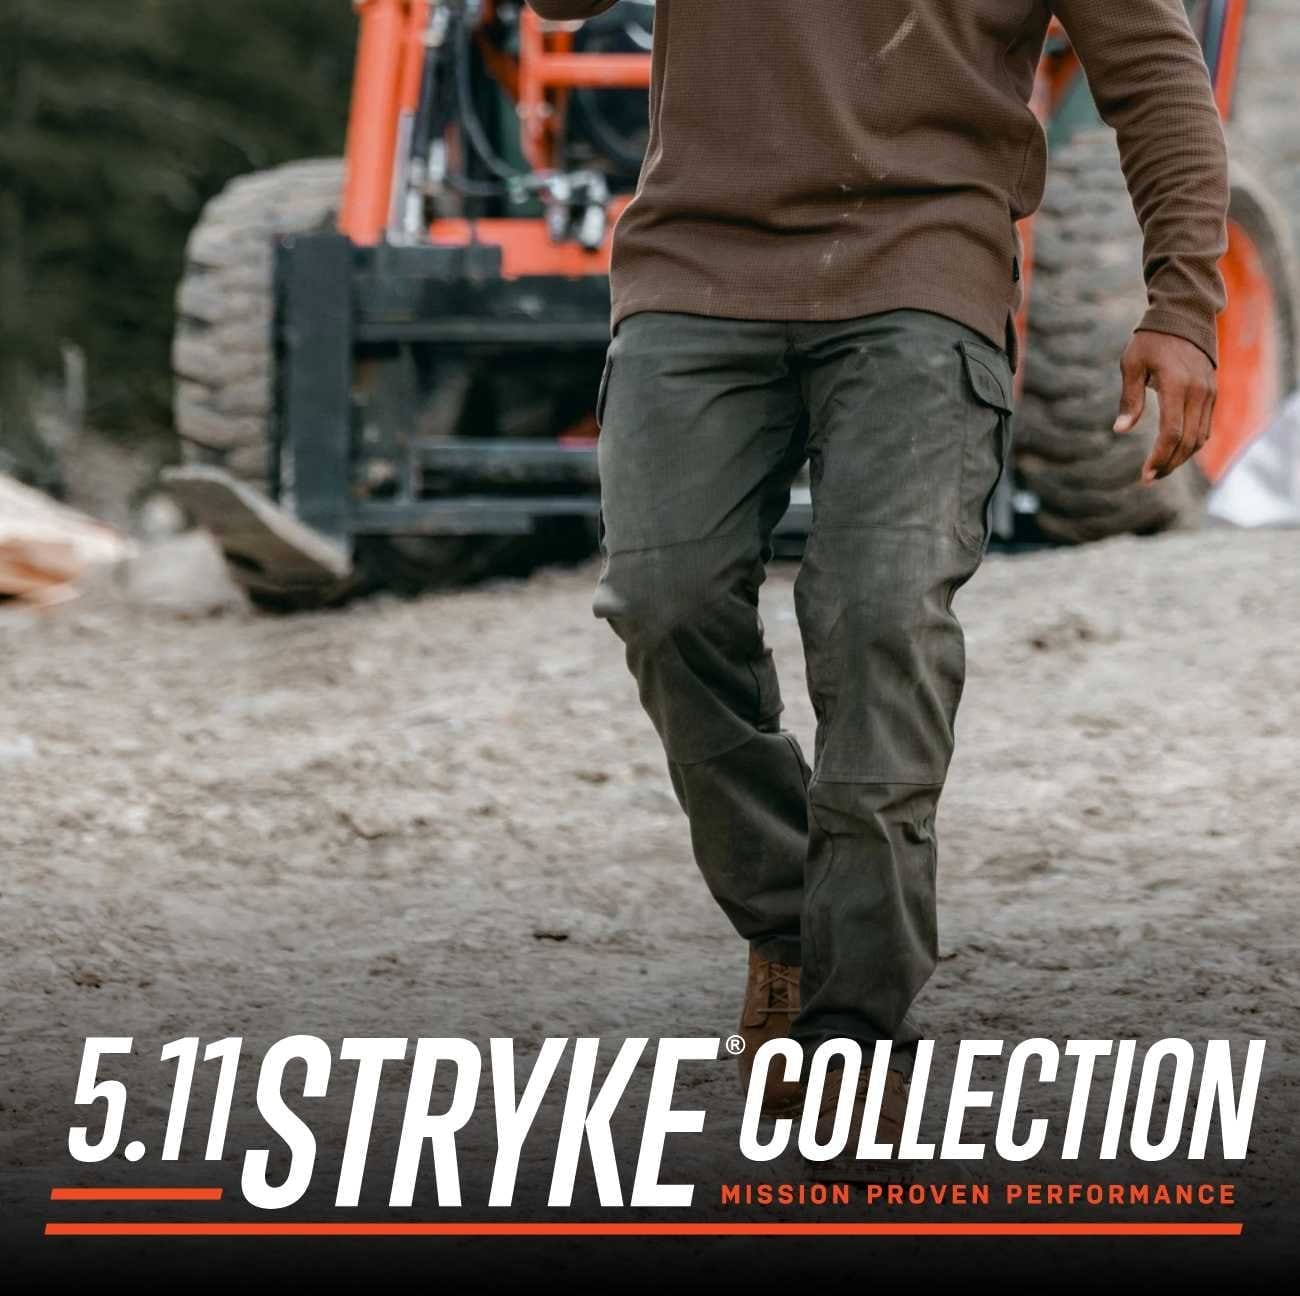 5.11 Stryke® Collection: Mission Proven Performance